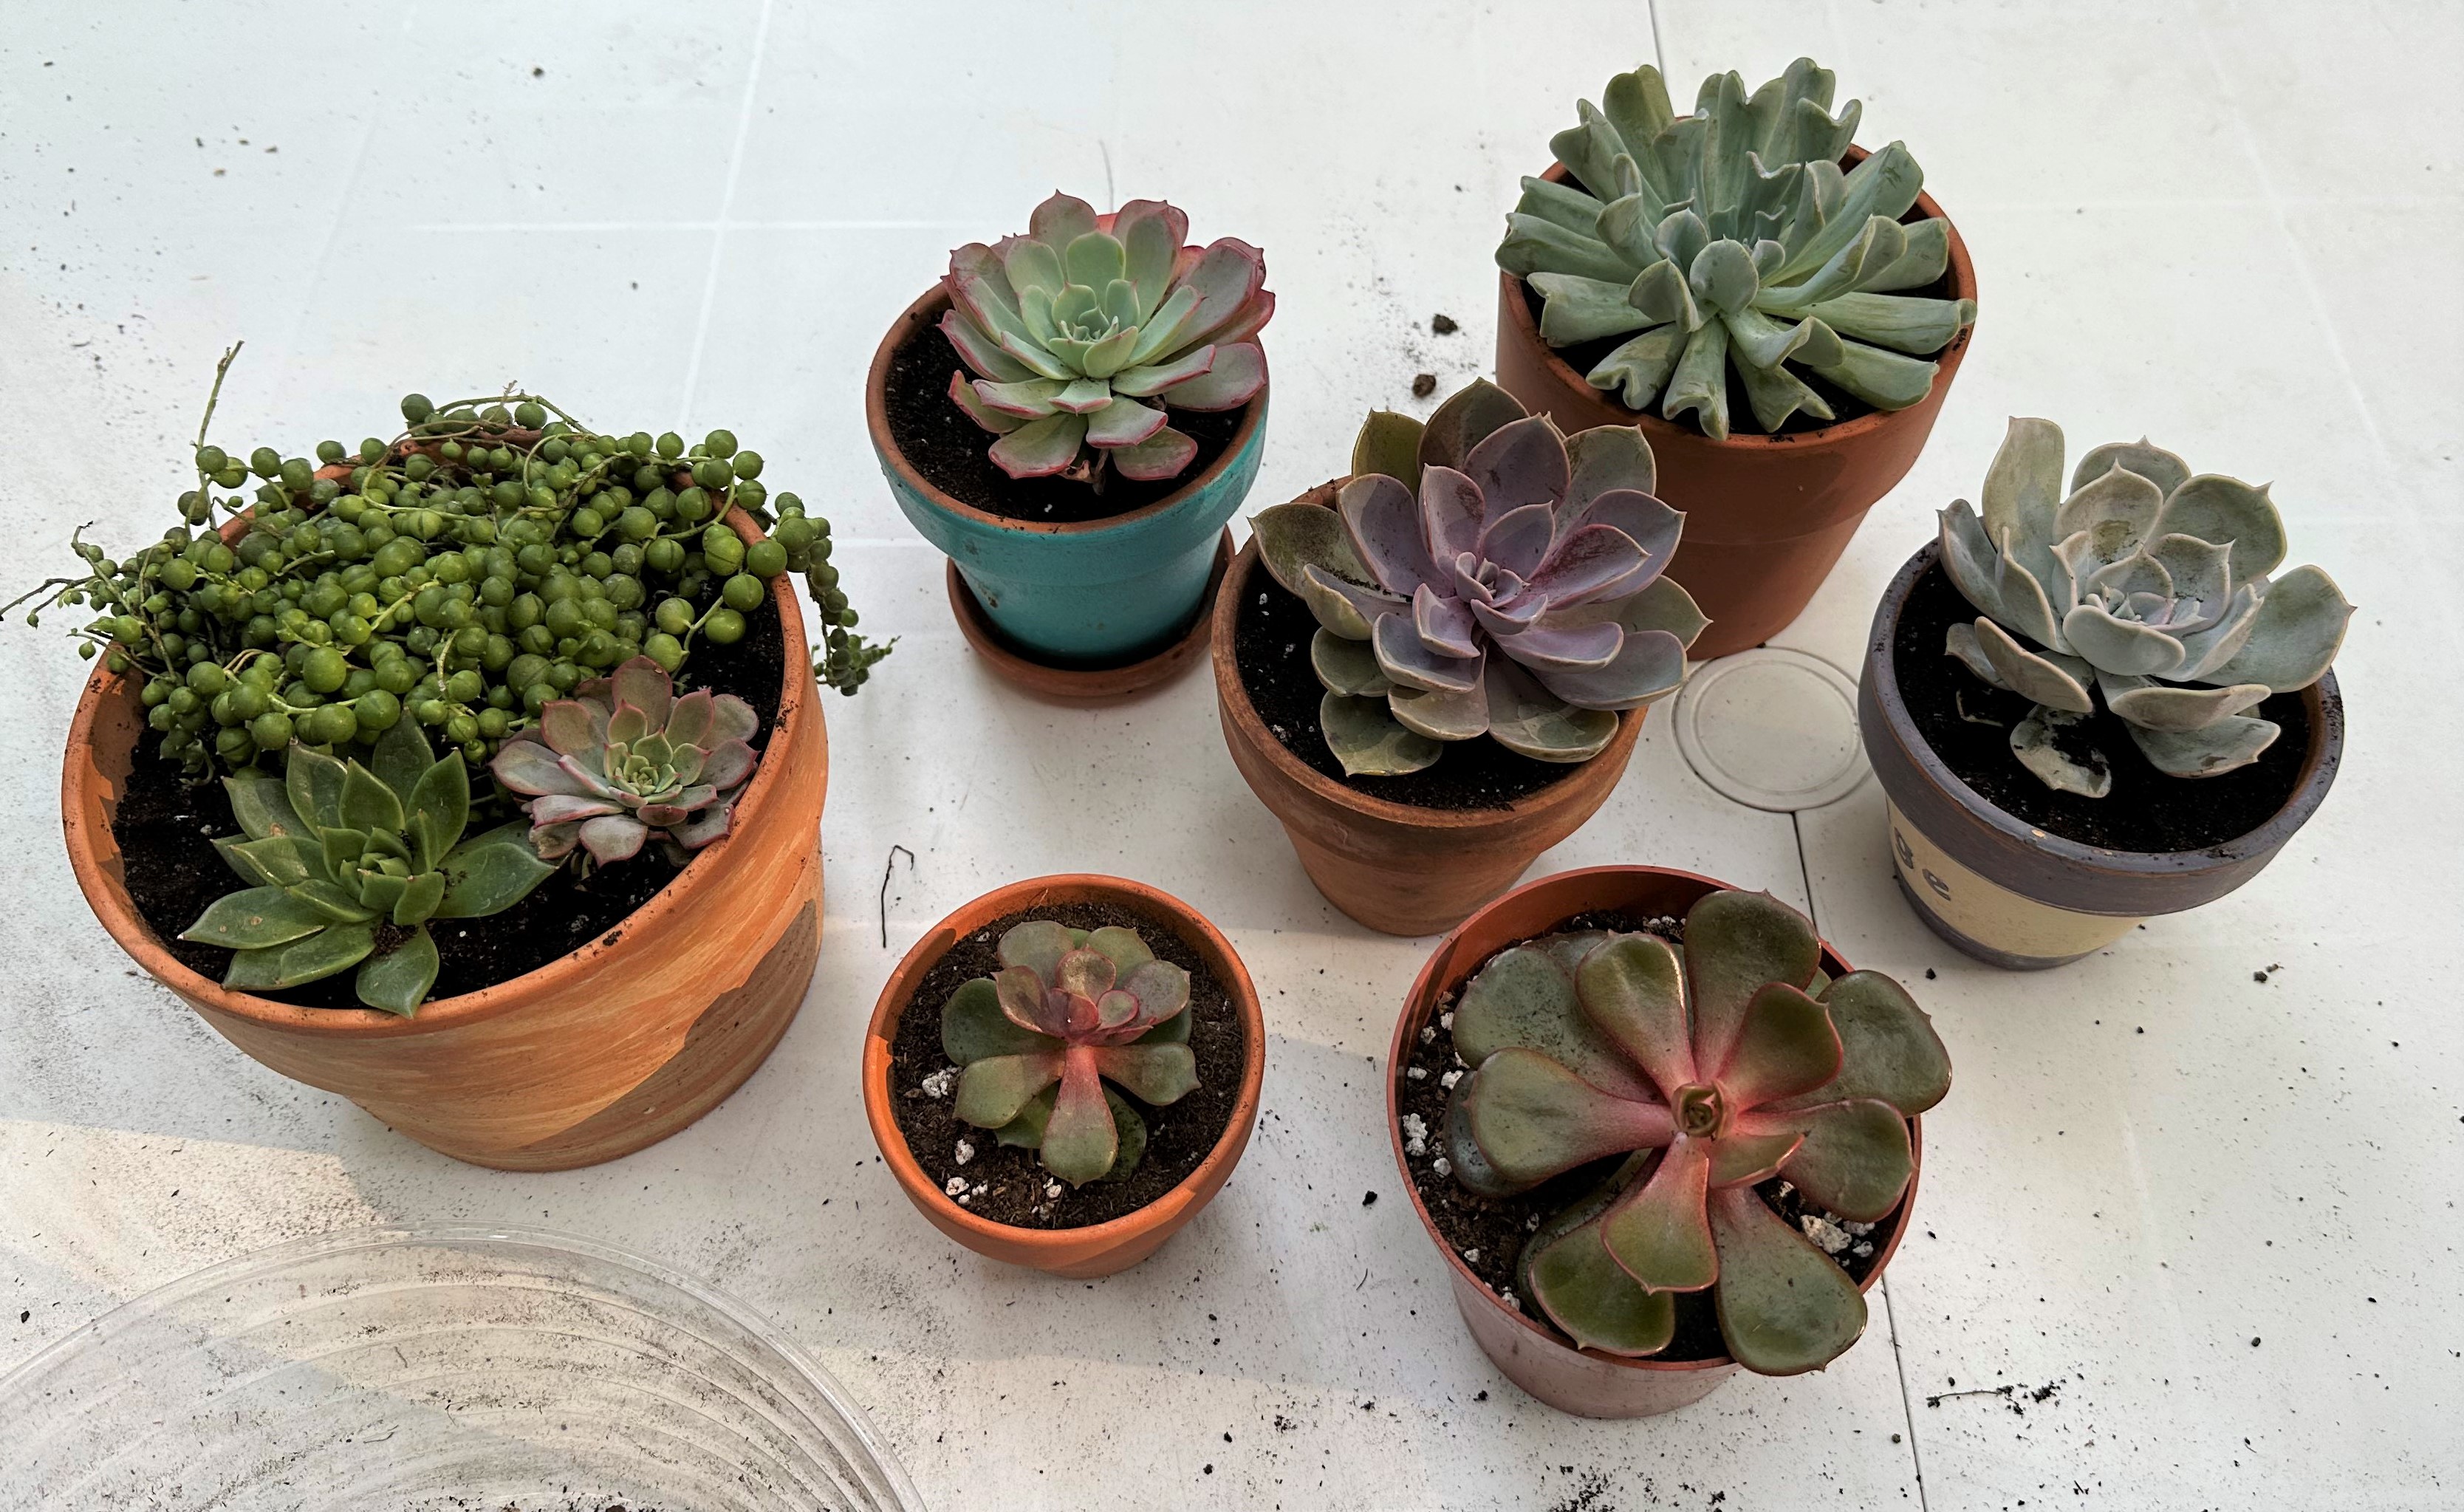 the same succulents now planted in the pots. One pot is larger and contains three plants.